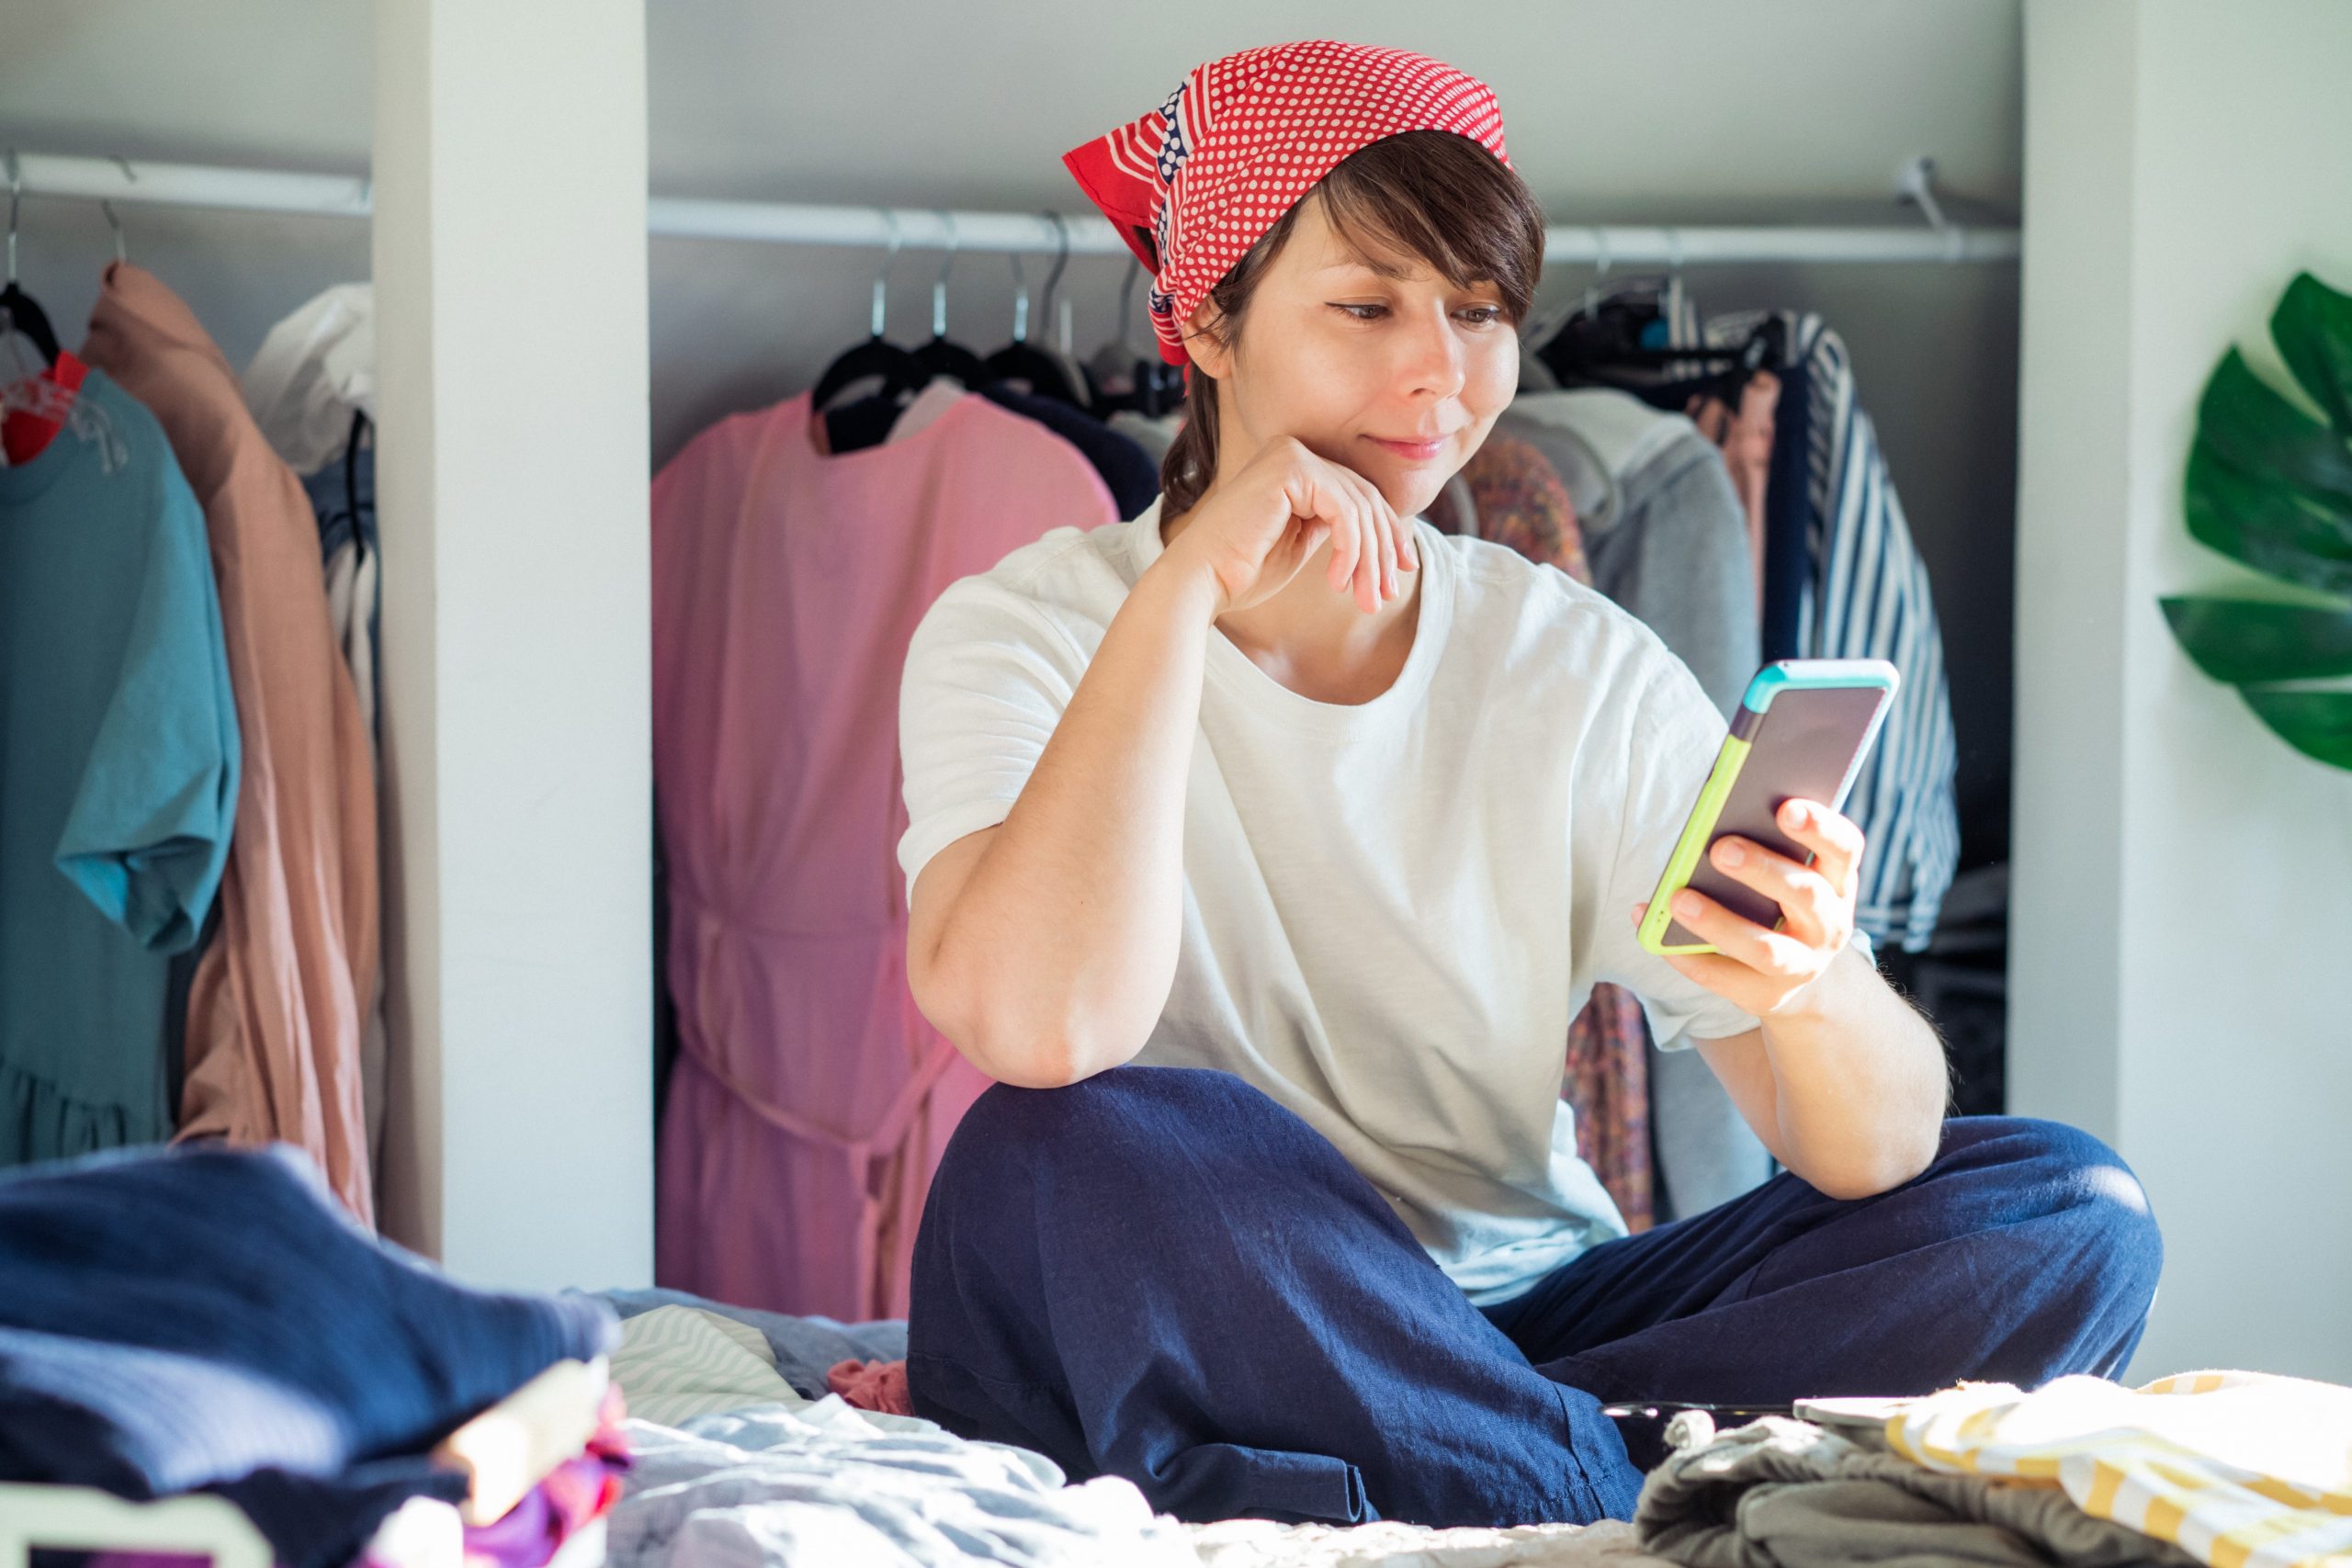 Young woman sitting on bed looking at phone, sorting through clothes